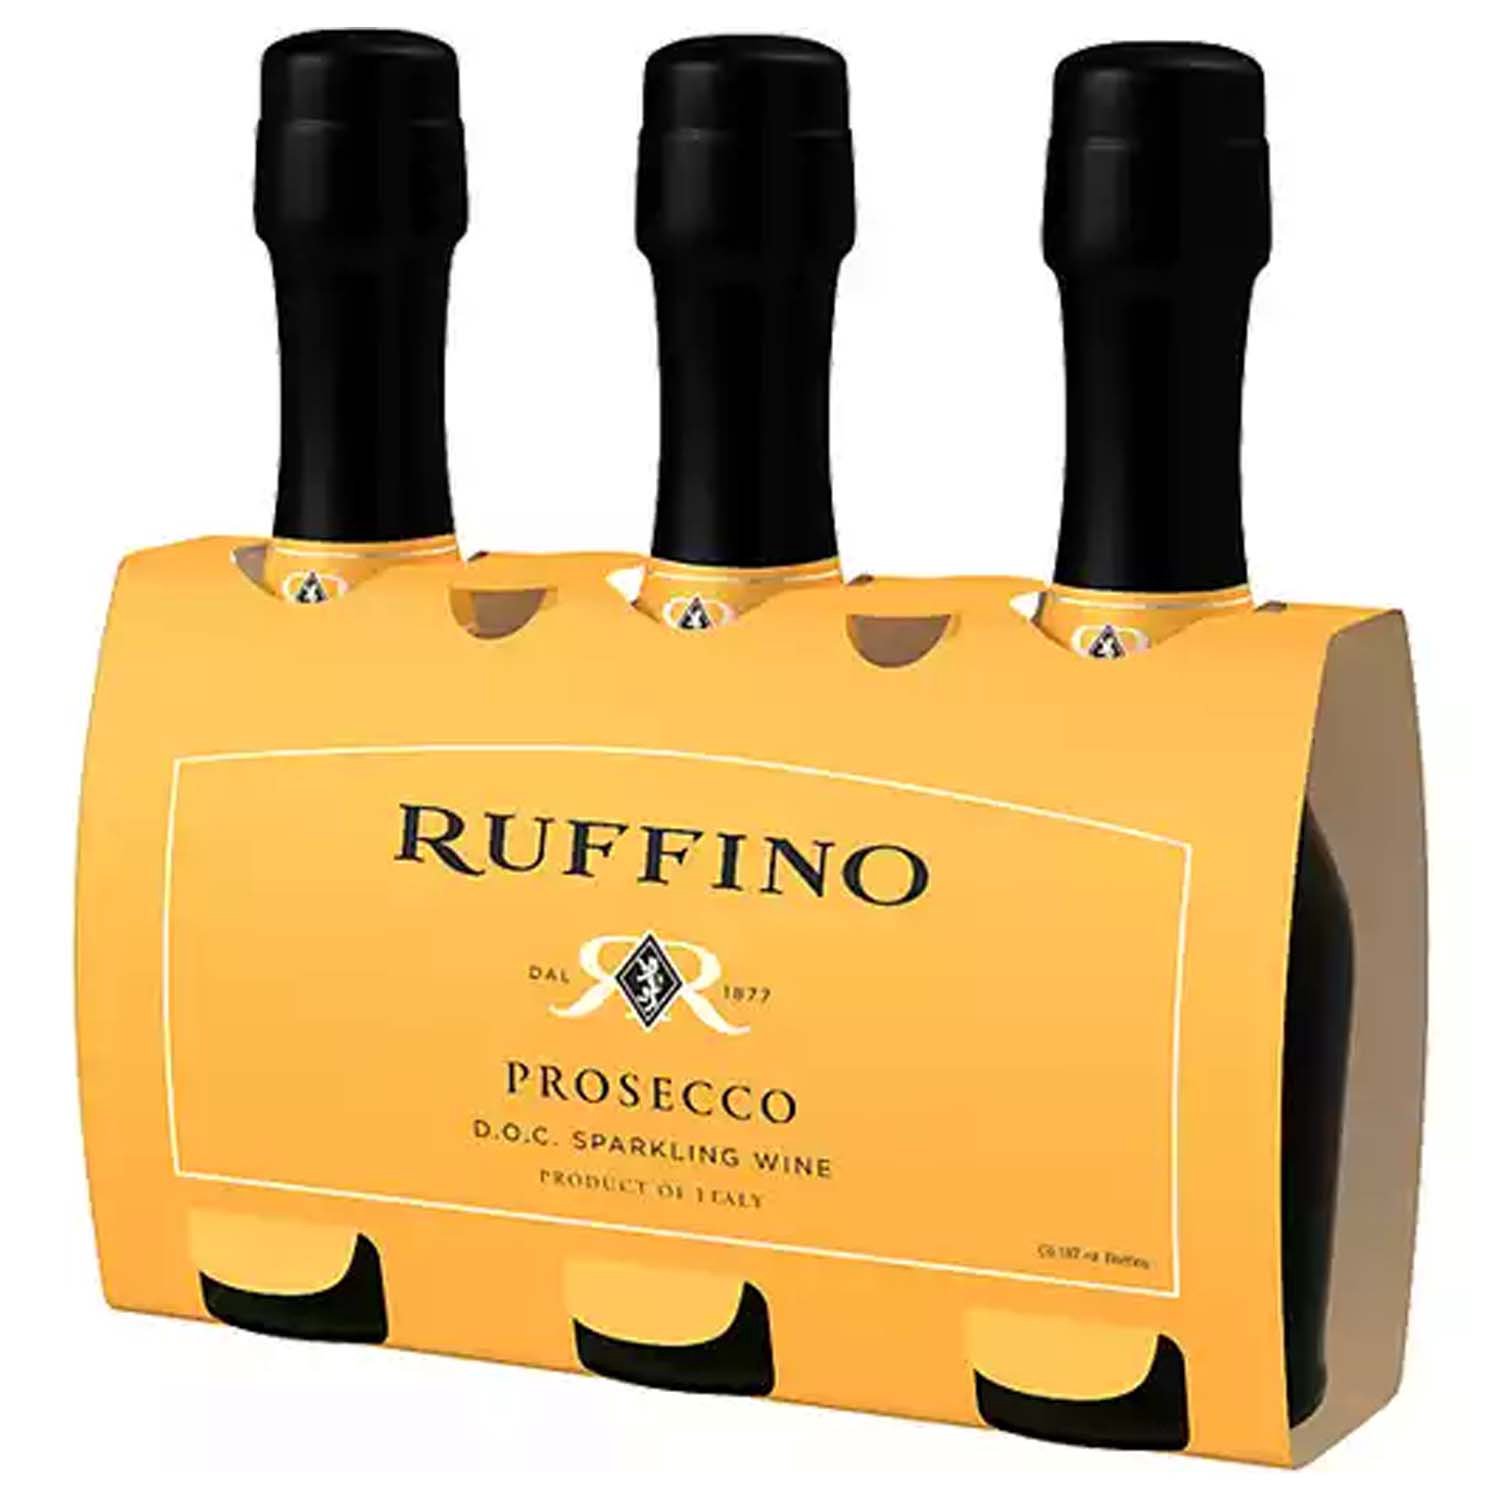 Ruffino Prosecco, Bottles (Pack of 3)